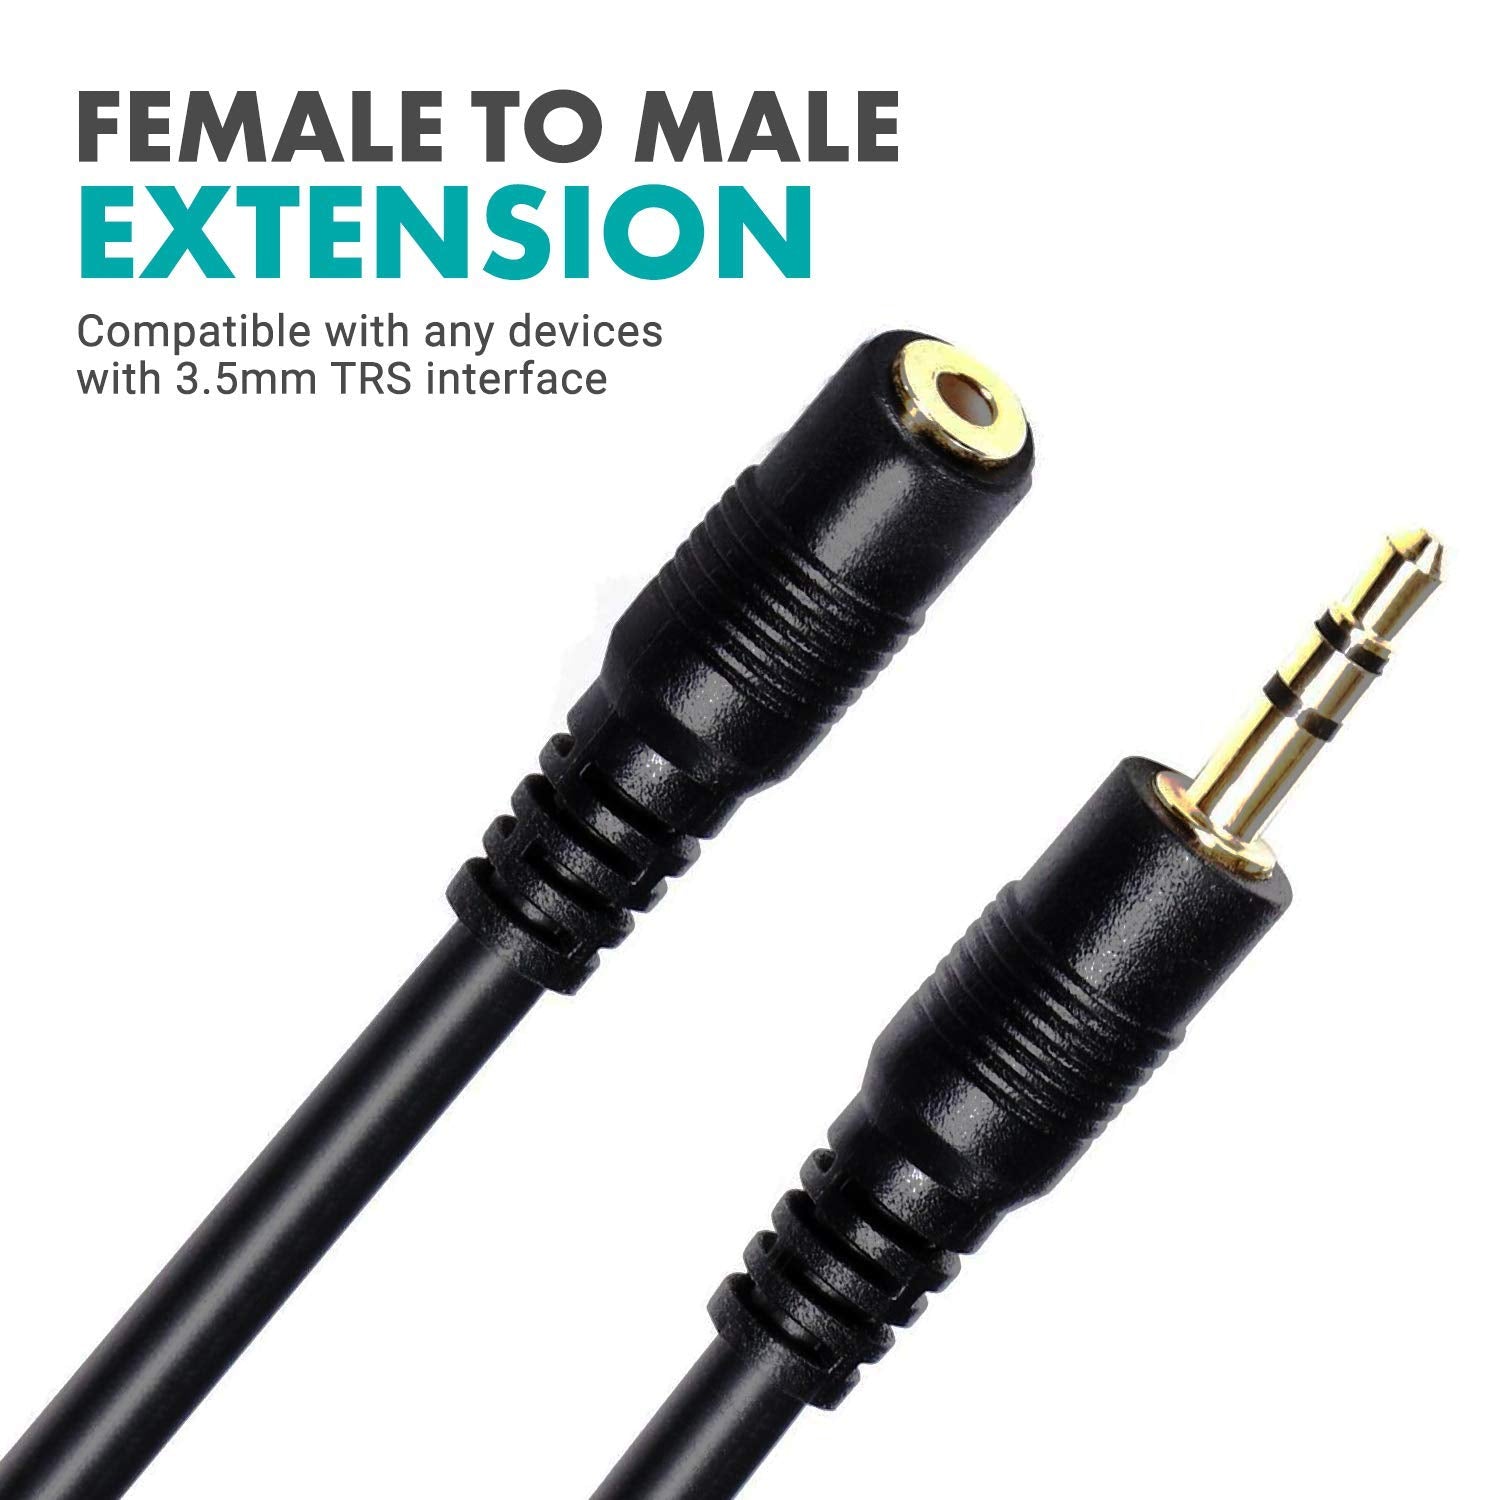 Movo TRS Female 3.5mm to TRS Male 3.5mm Extension Cable for Camera/Video Microphones (fits Rode, Takstar, Audio-Technica, Canon, Nikon)  - Good